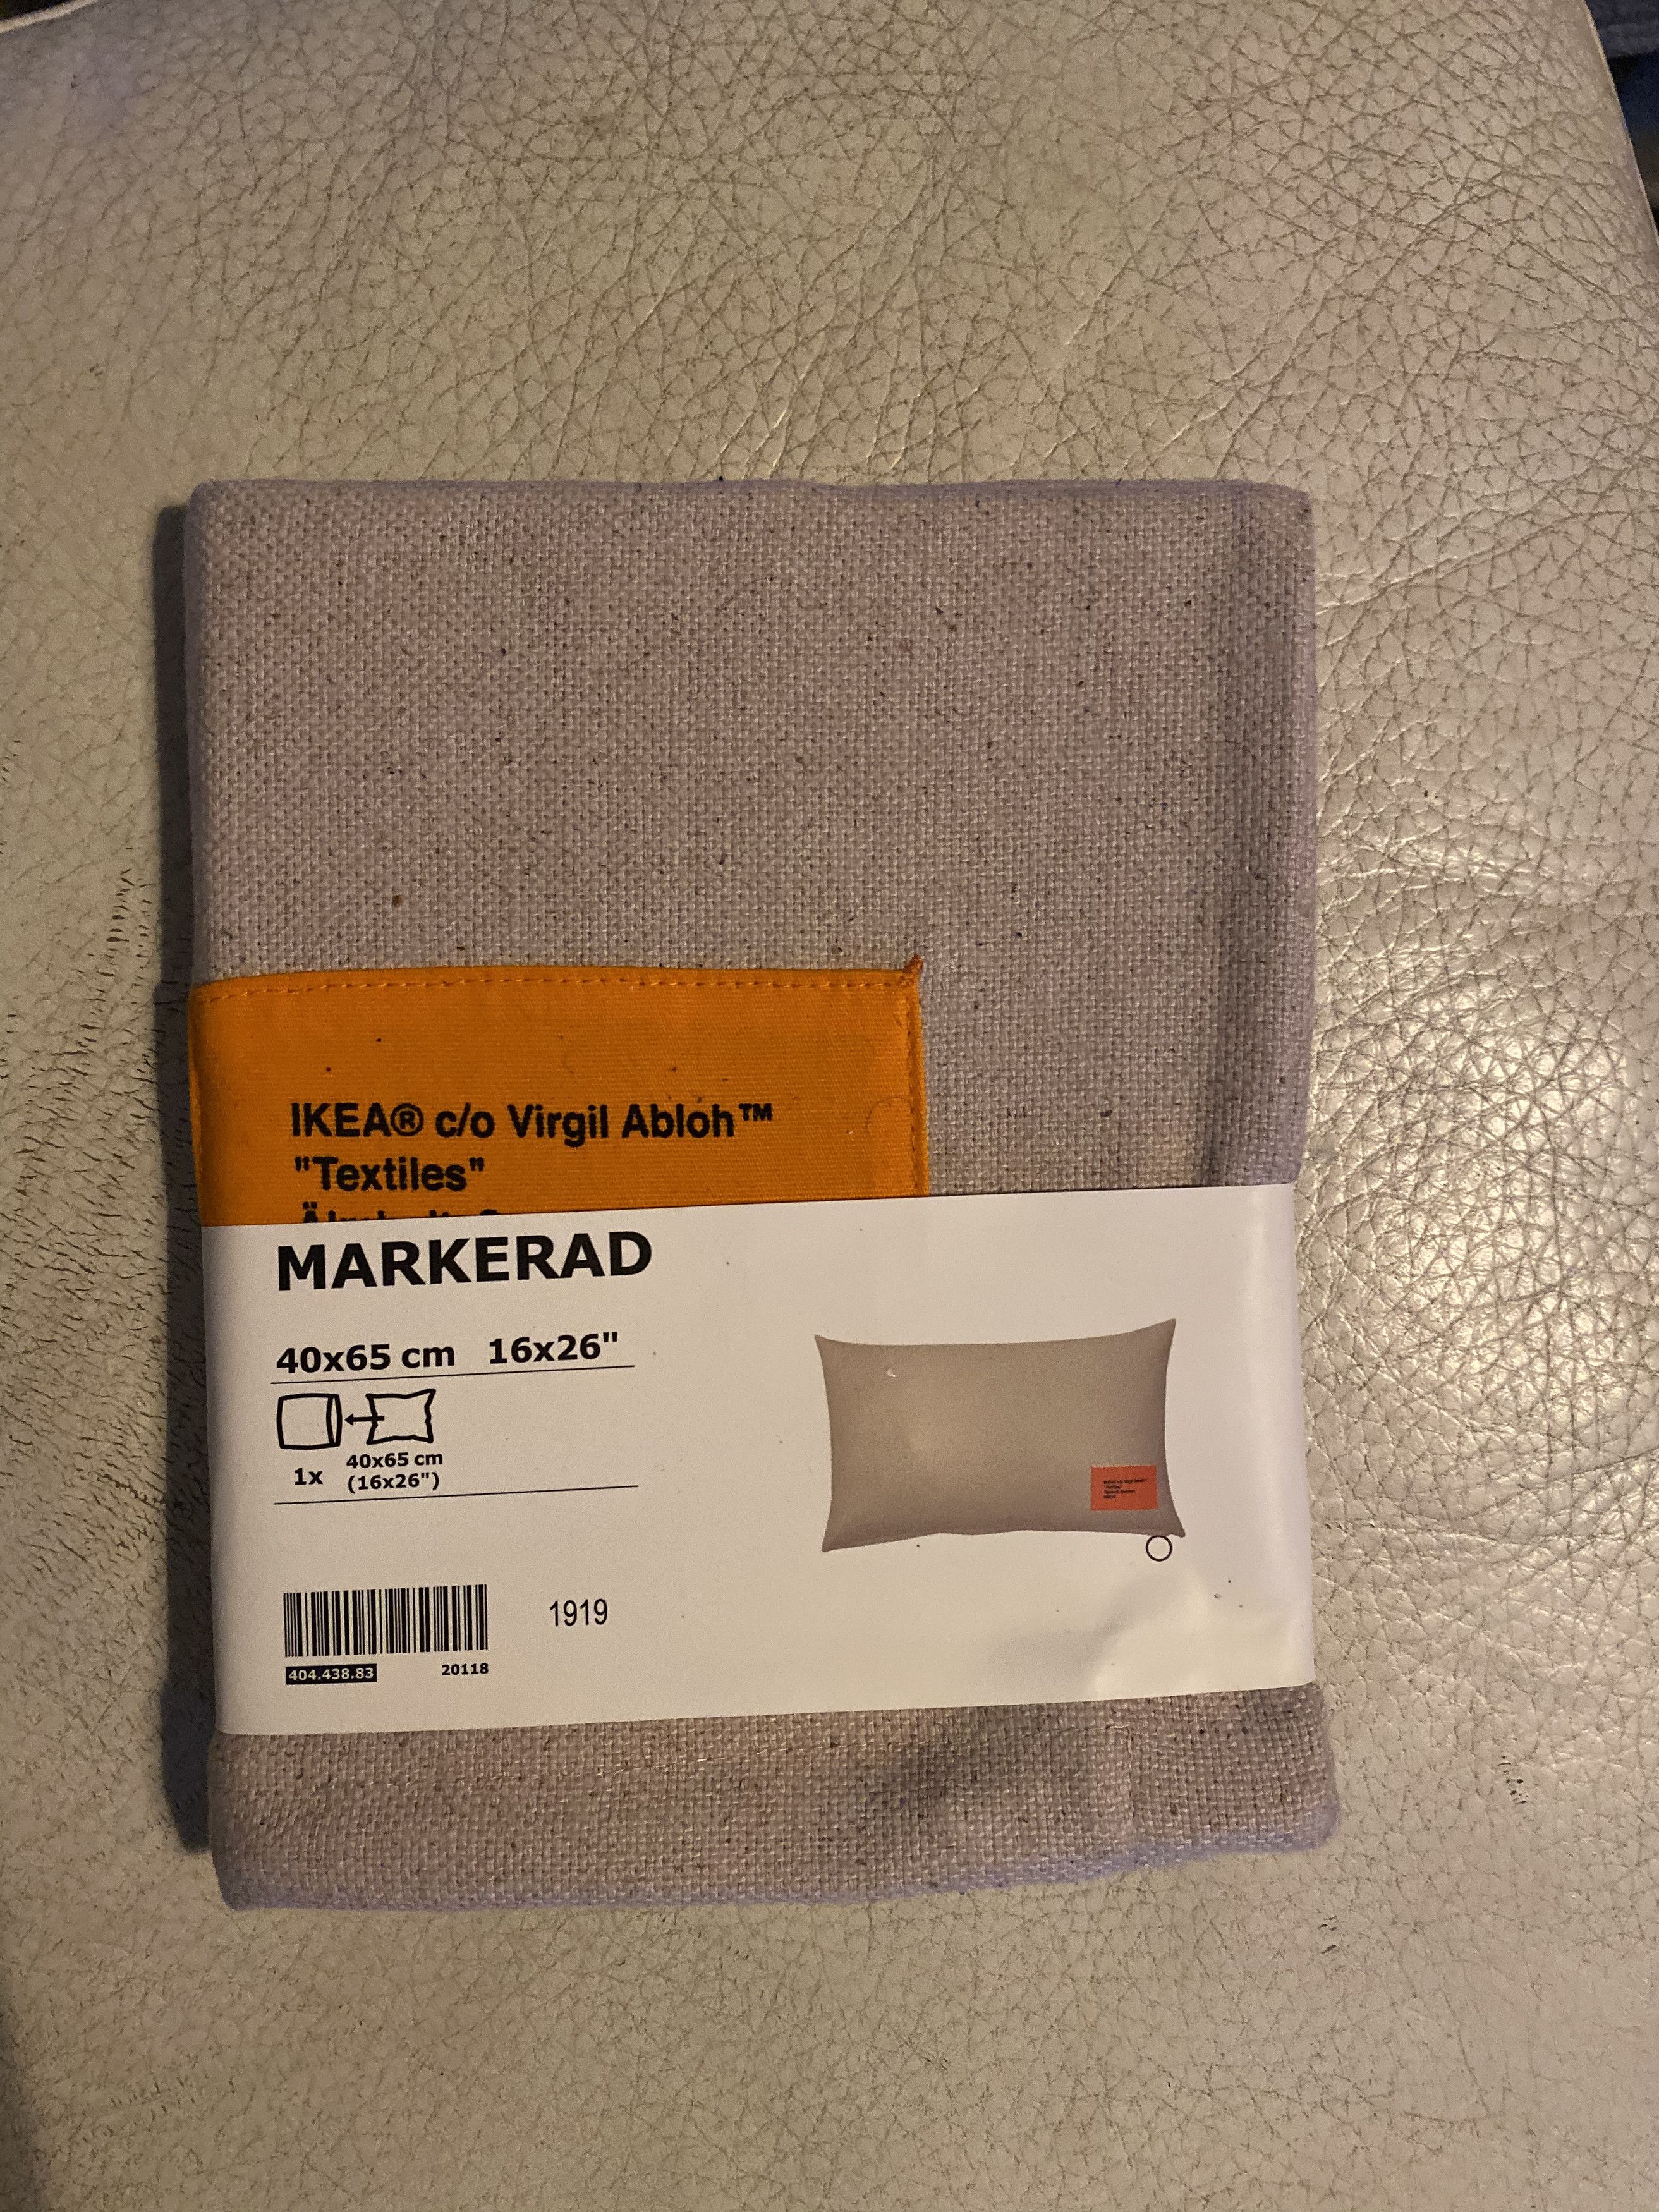 Brand New 100% Authentic Virgil Abloh x Ikea Markerad Cushion Cover Beige